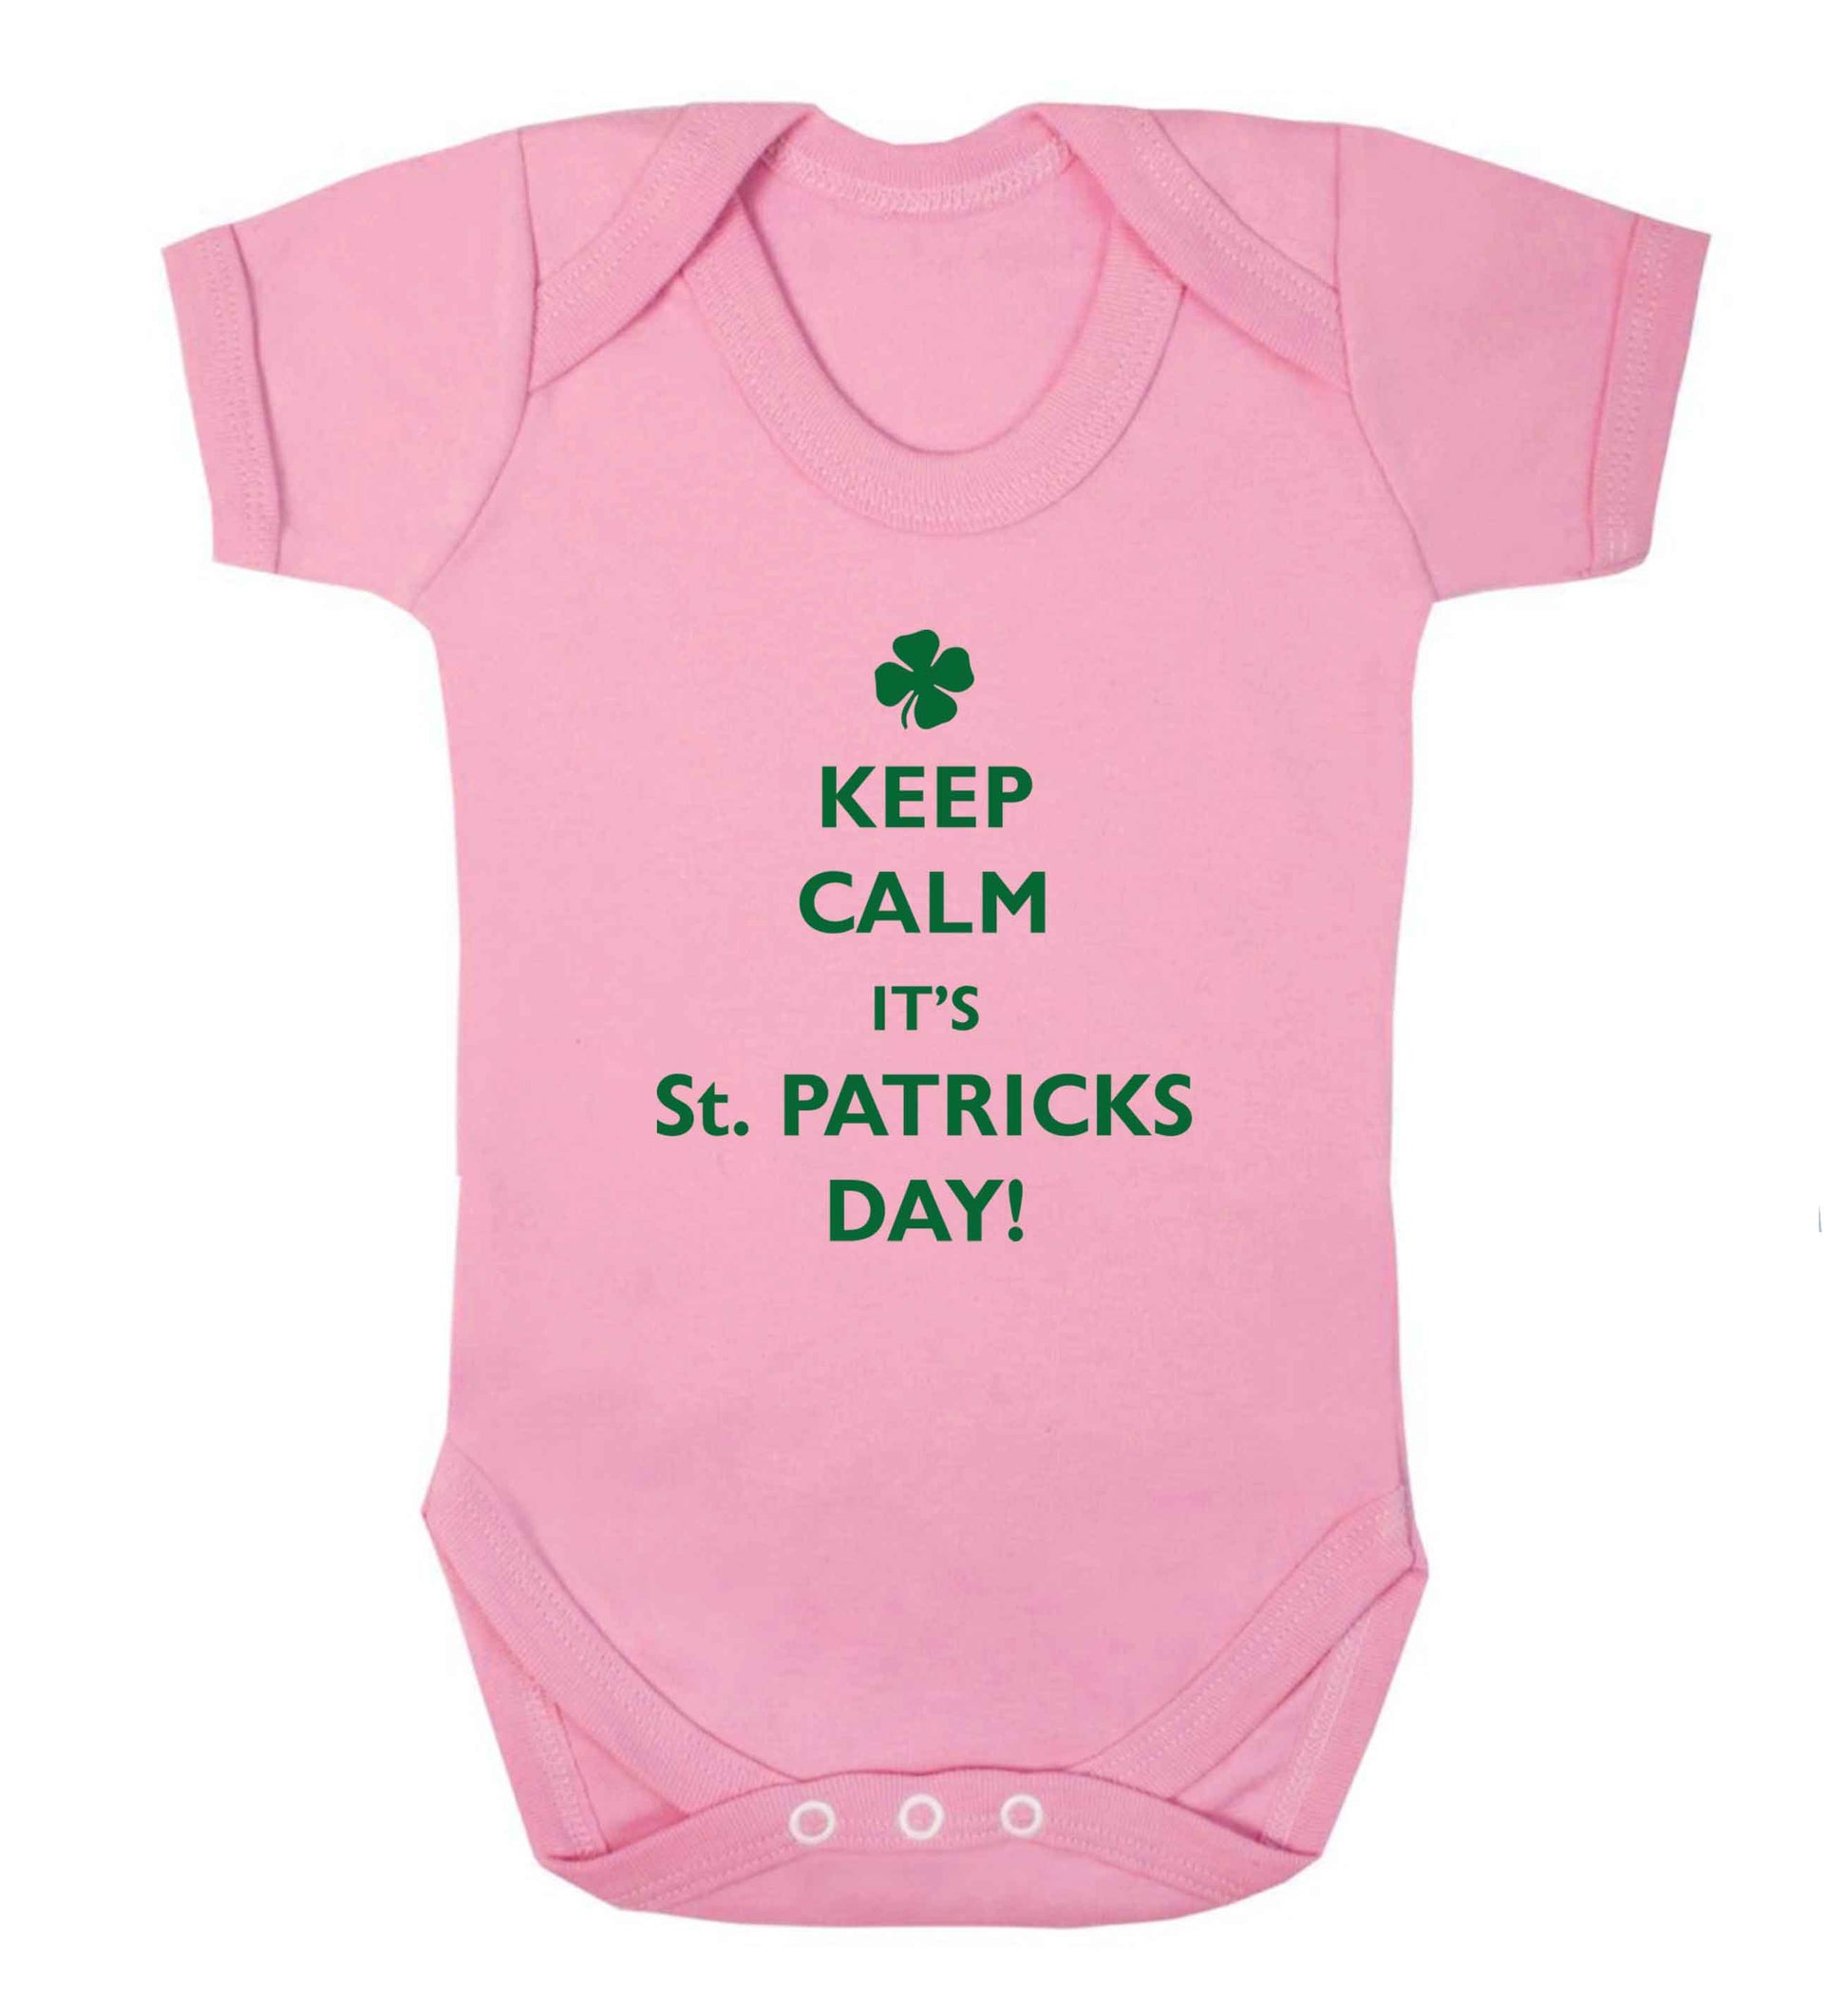 Keep calm it's St.Patricks day baby vest pale pink 18-24 months